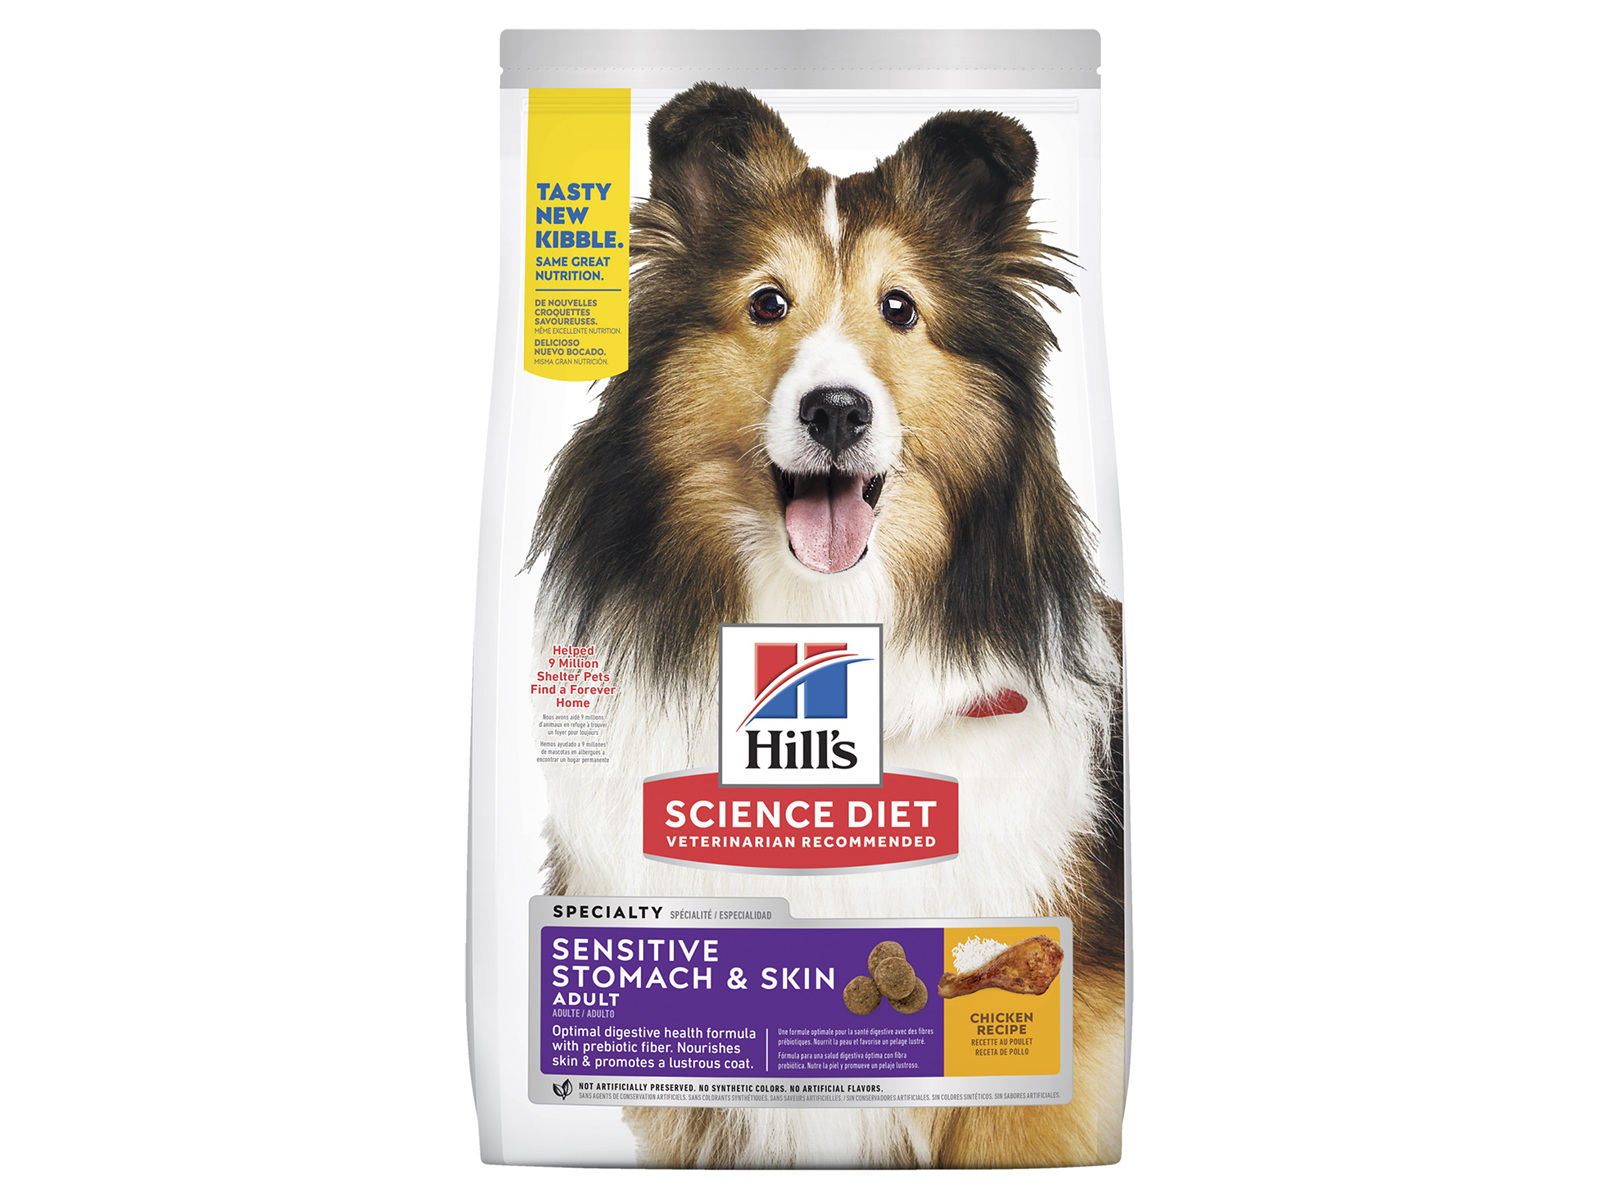 Hill's Science Diet Adult Sensitive Stomach & Skin Dry Dog